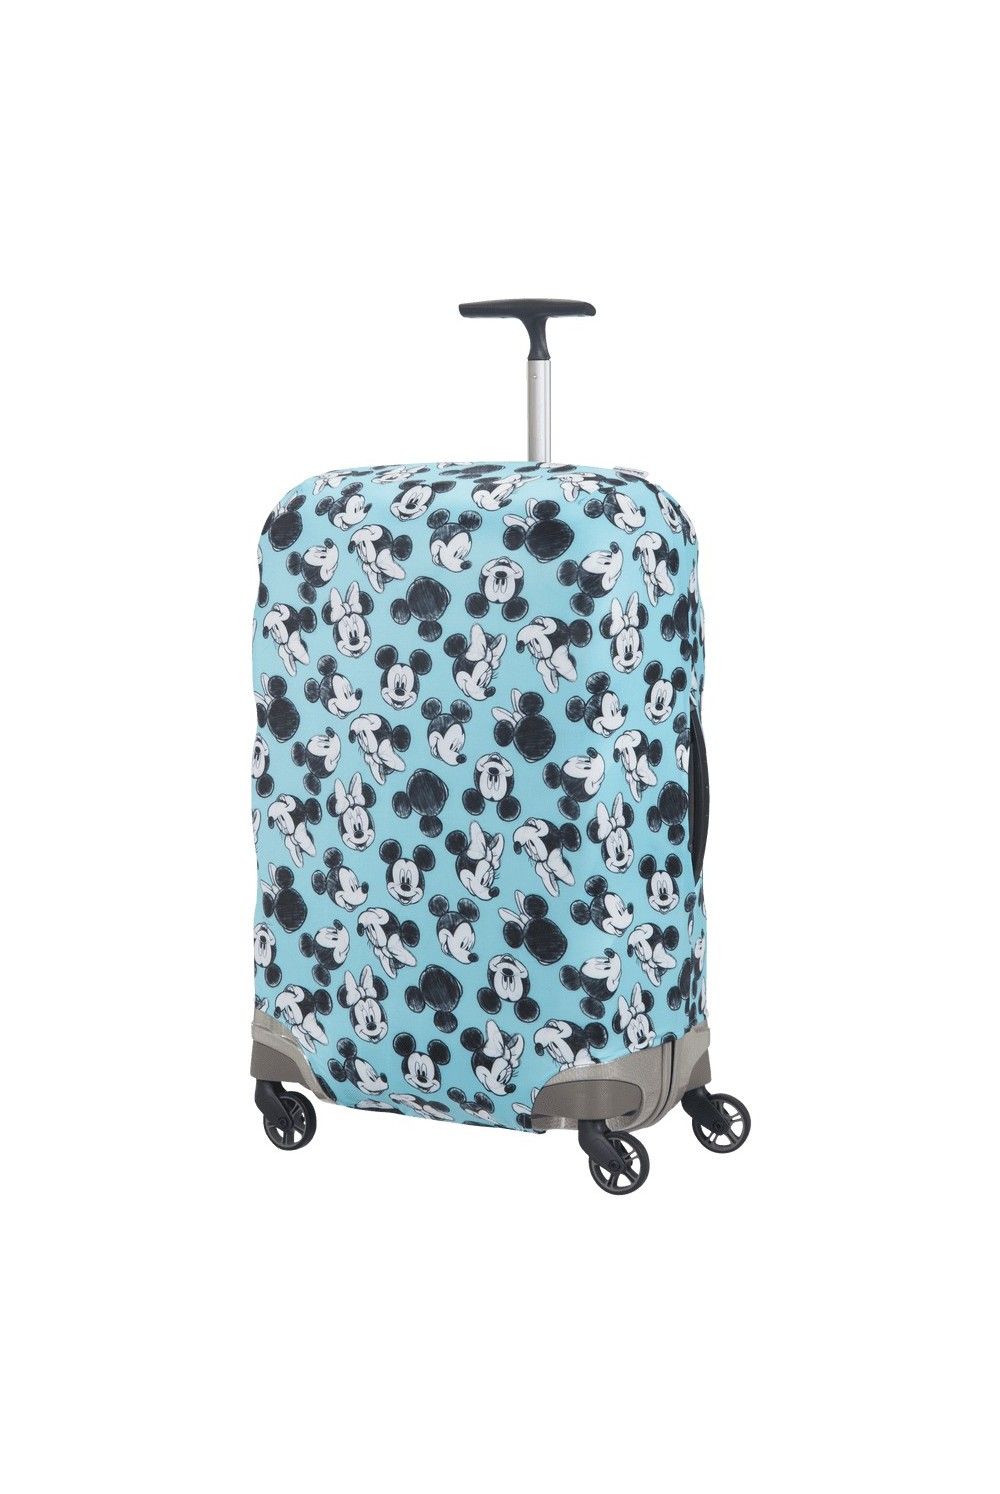 Samsonite Luggage Cover Disney M for middle sized suitcases